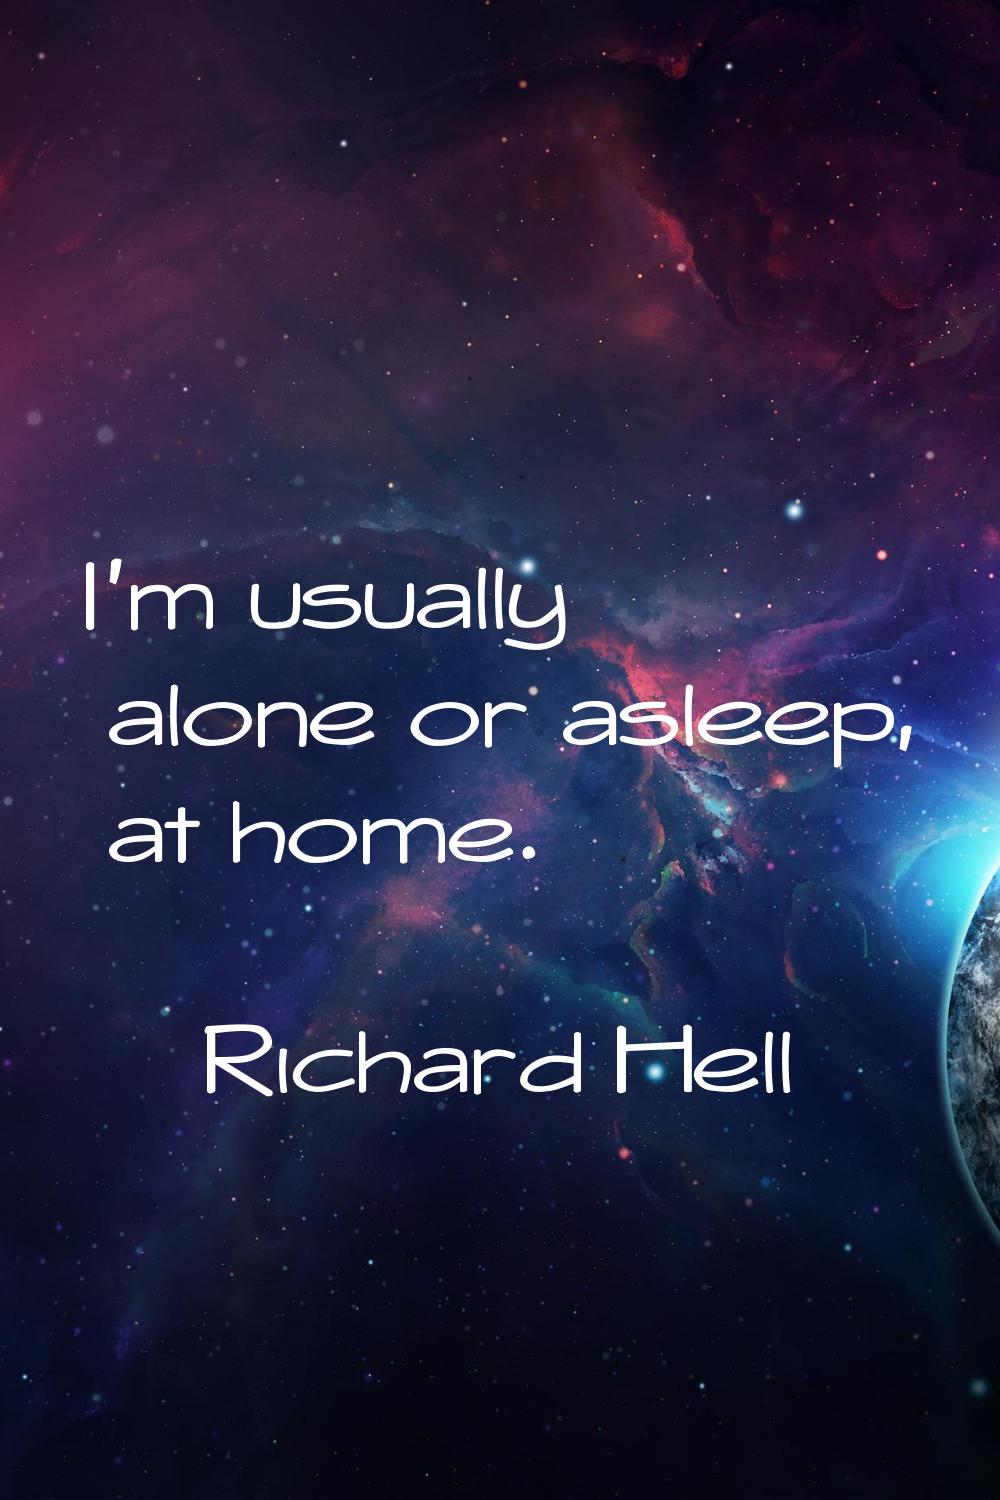 I'm usually alone or asleep, at home.